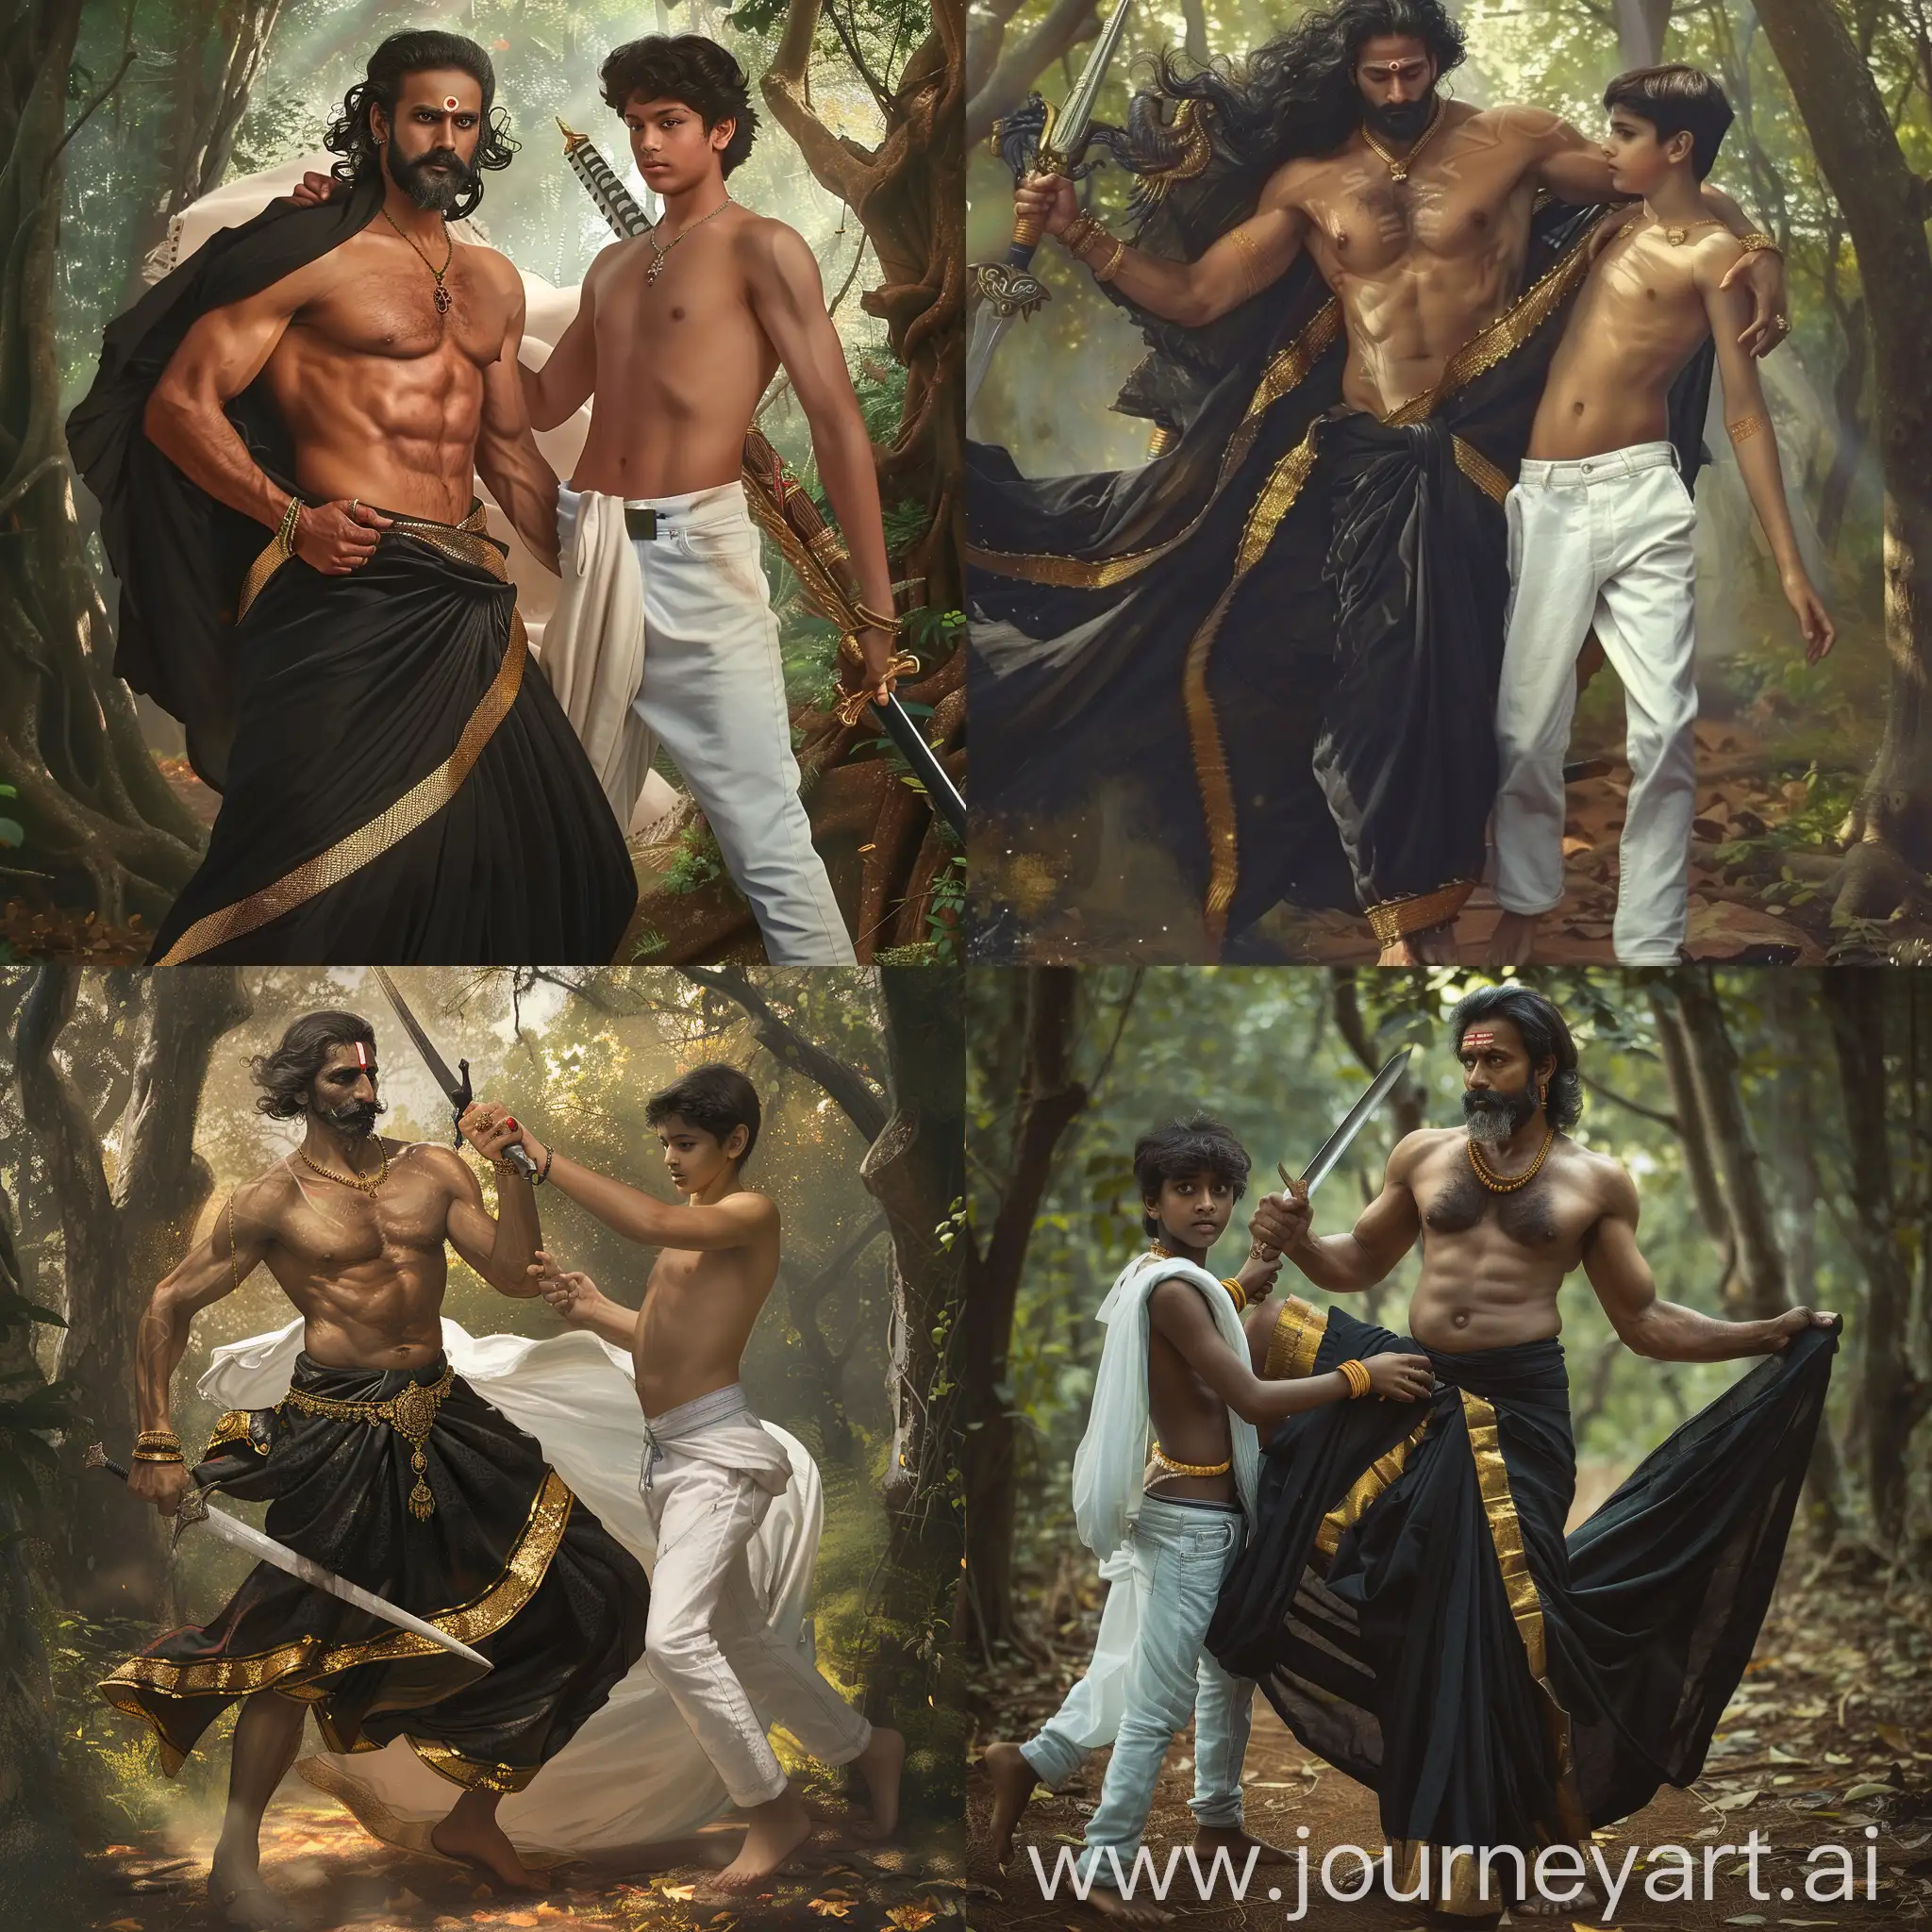 Ancient handome South Indian man, he is very masculine, wearing only a body hugging black dhothi with golder boarder, he have long her, upper body part is completely bare, he has beared and mustace, he has sword in one hand, and he is affectinately holding a young man who is wearing white pants  and  shirt looking modern 25 year old, they are in a forest, dress is flowing in wind. Younger boy wearing a modern denim pant, elder man wearing a traditional dhothi, 